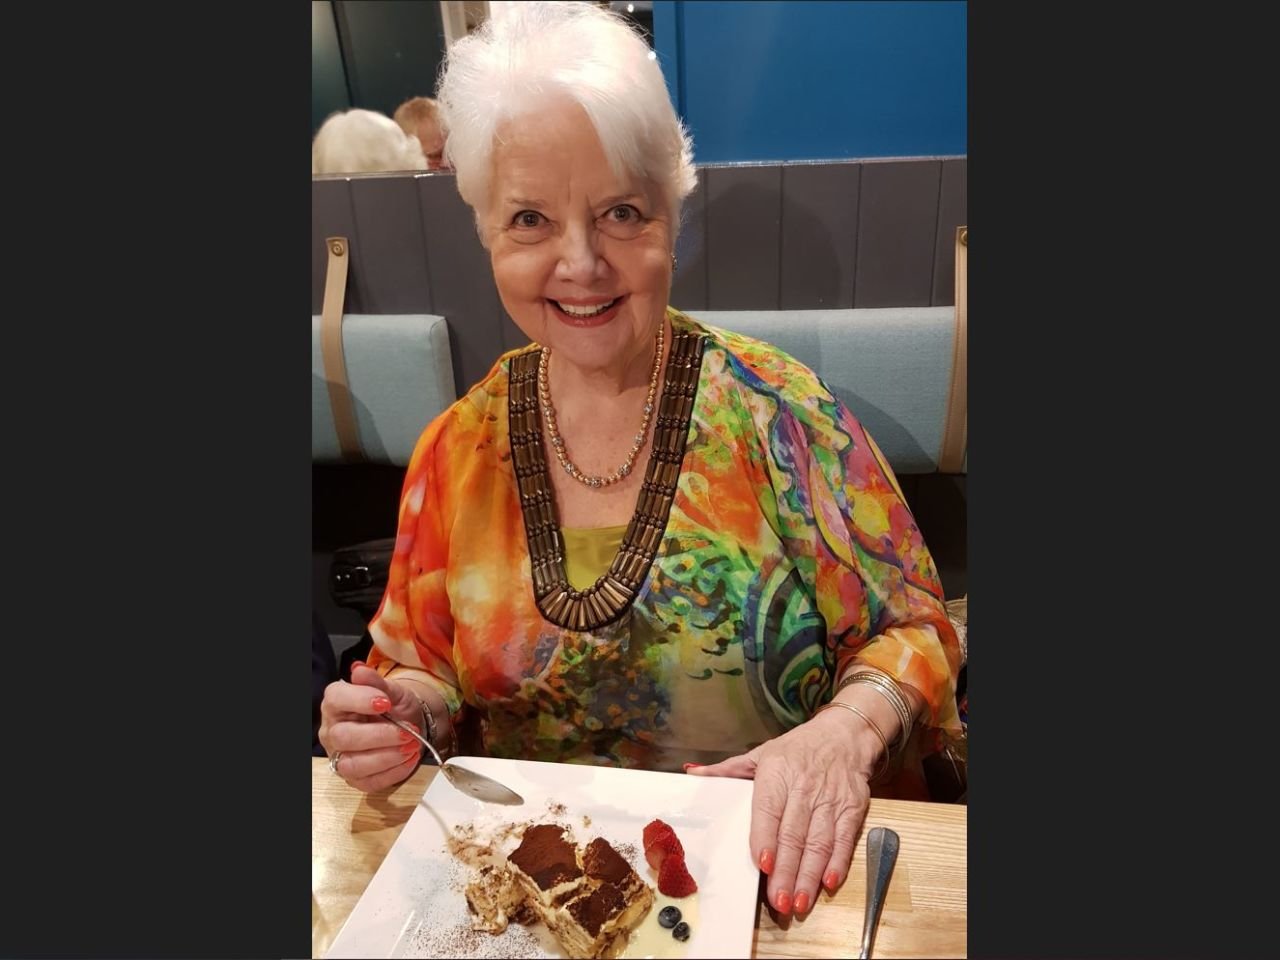 Our very own Dessert Queen!
At our August 2022 dinner at Pirahna Fish Caf, New Farm. An excellent evening!
Photo: Courtesy Francesca.